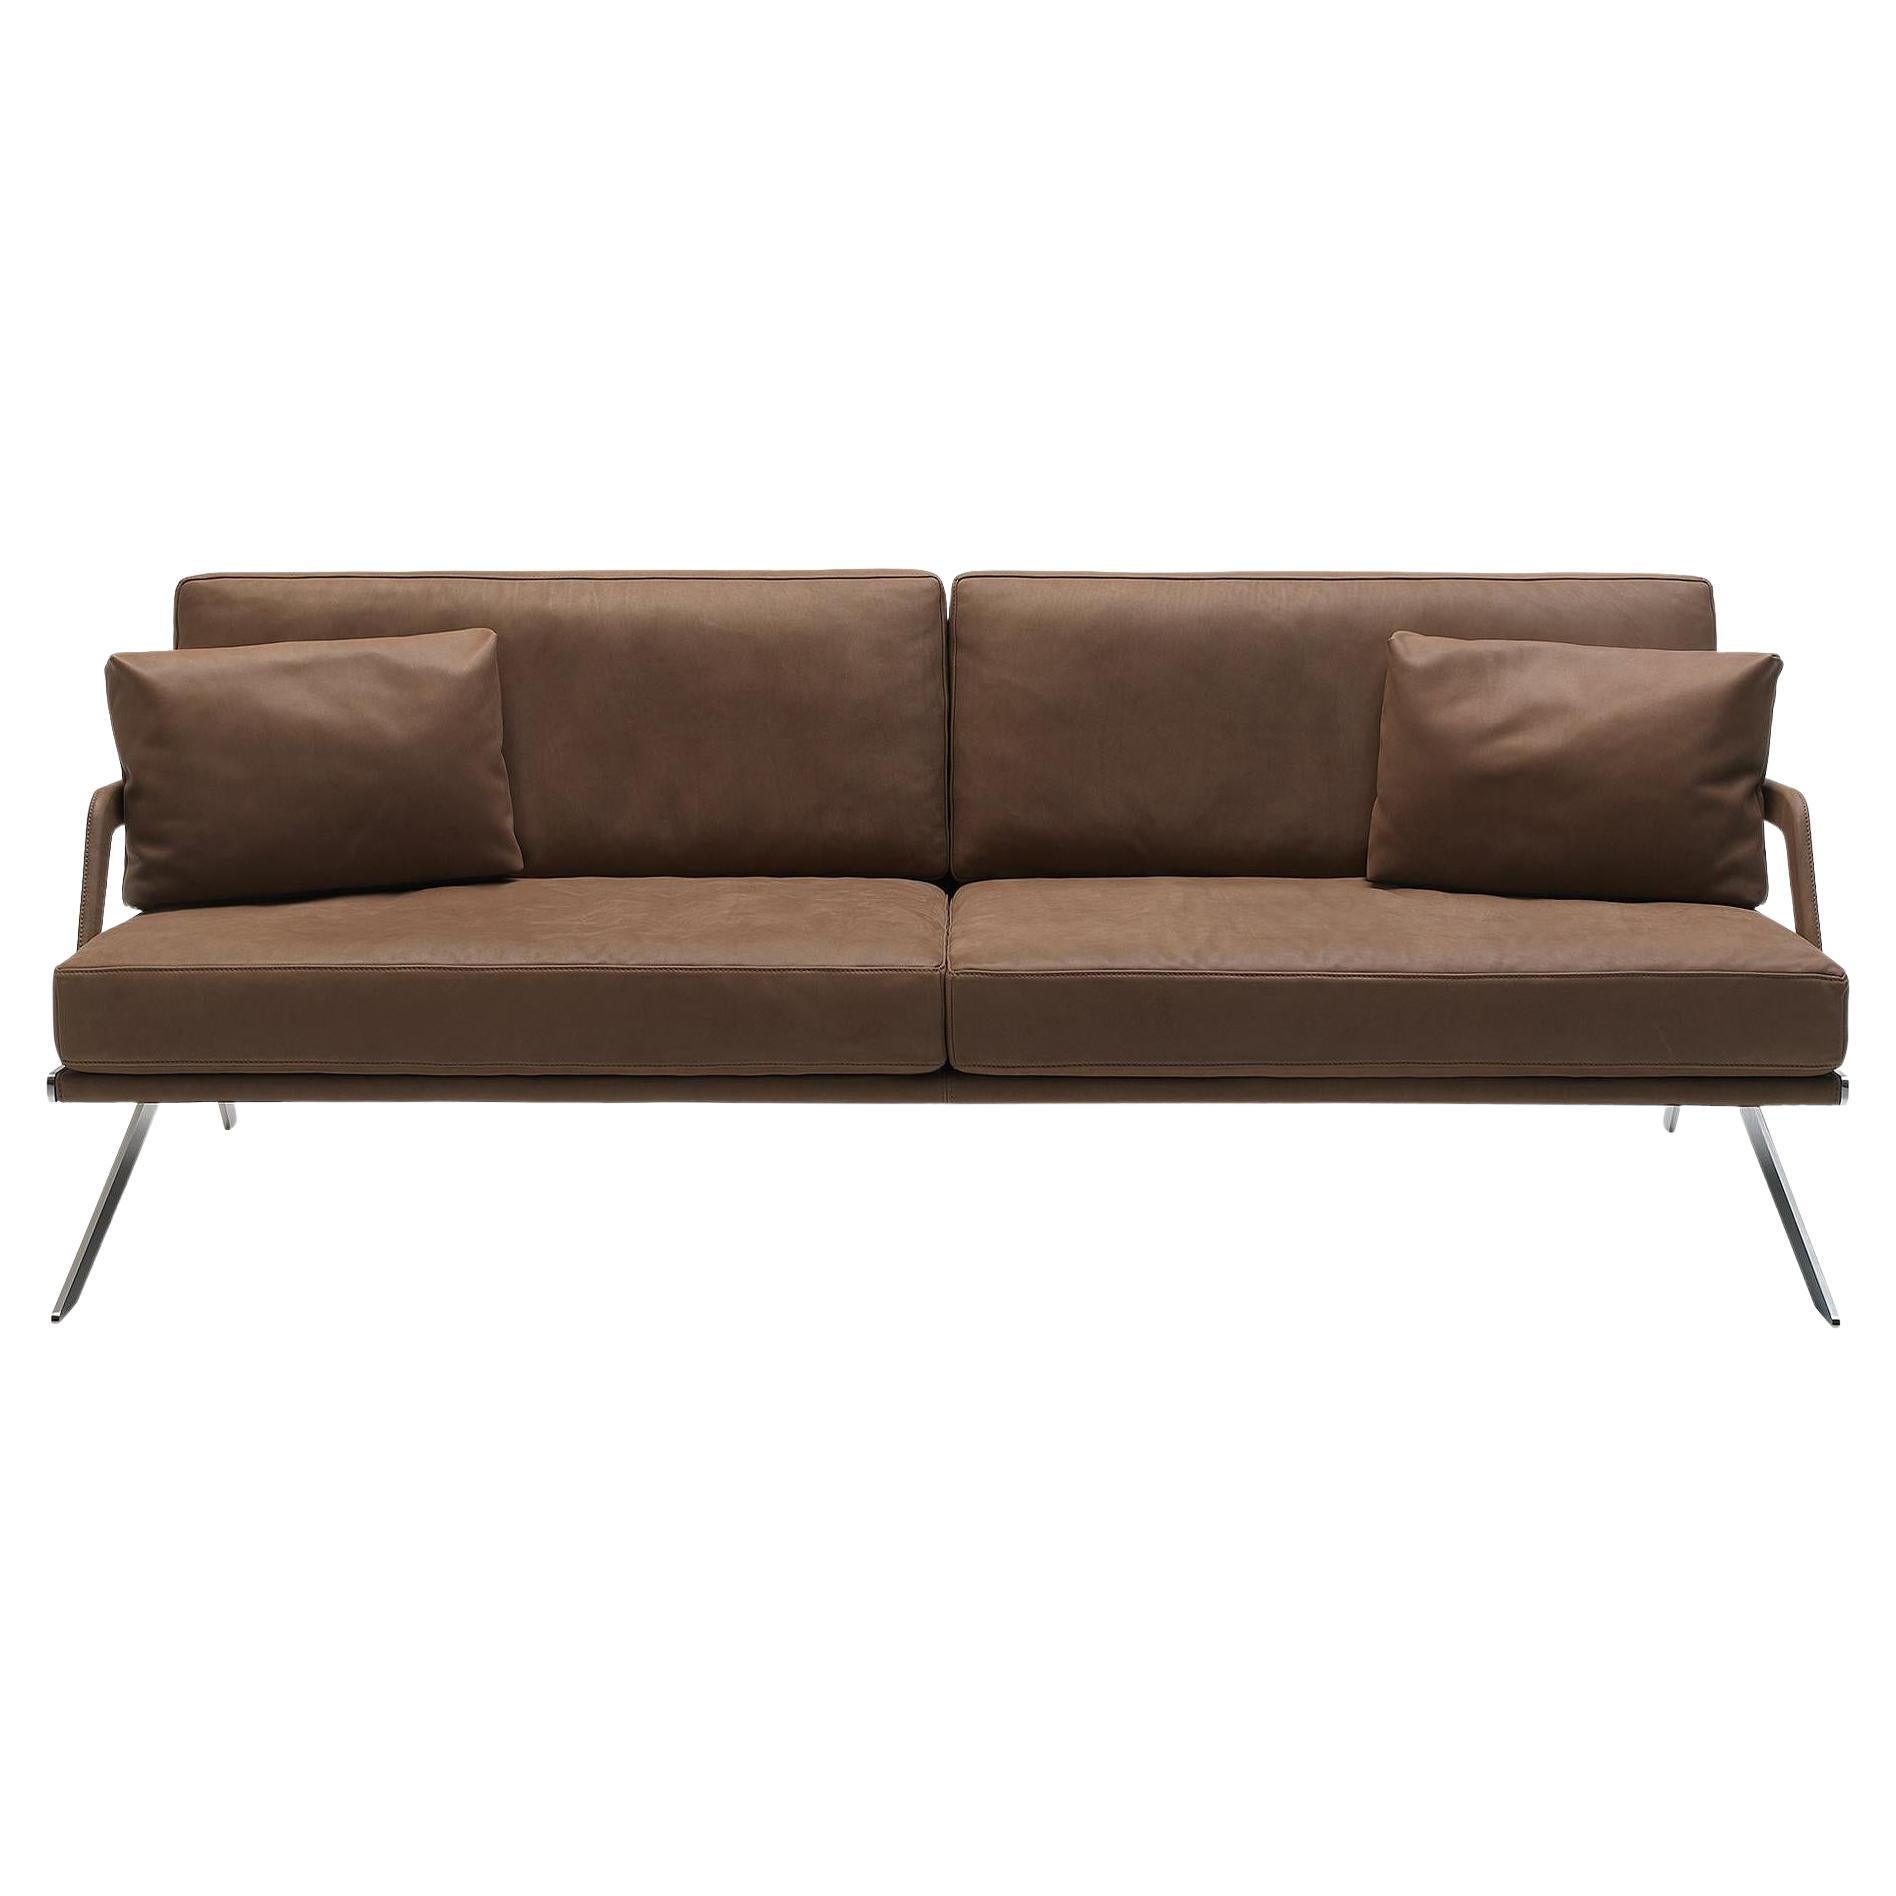 De Sede DS-60/23 Sofa in Brown Leather Upholstery by Gordon Guillaumier For Sale